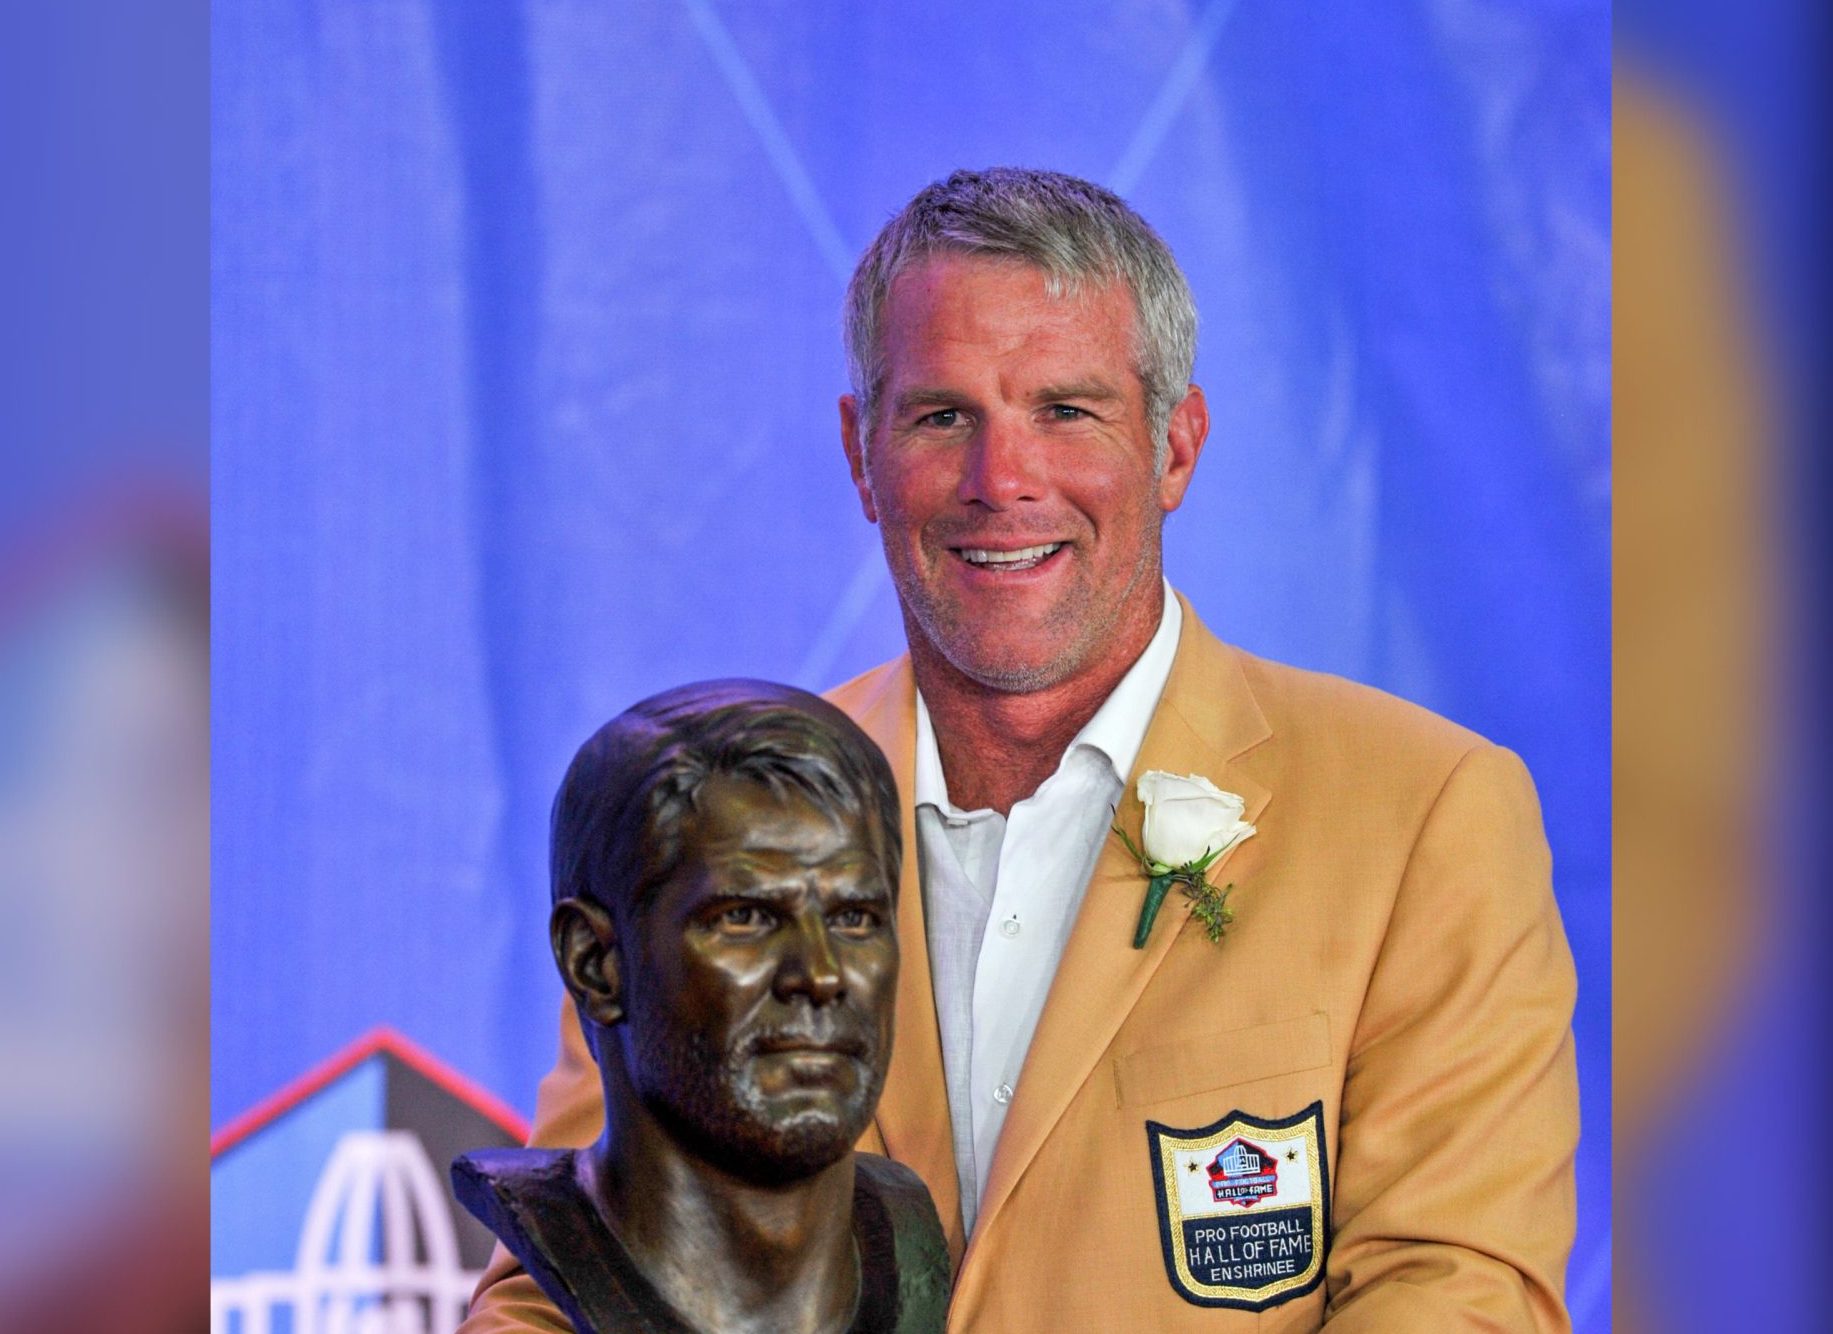 Former NFL Player Brett Favre Labeled As “Welfare Queen” Amid Reports Former MS Governor & Nonprofit Leader Gave Him $6M In Welfare Funds